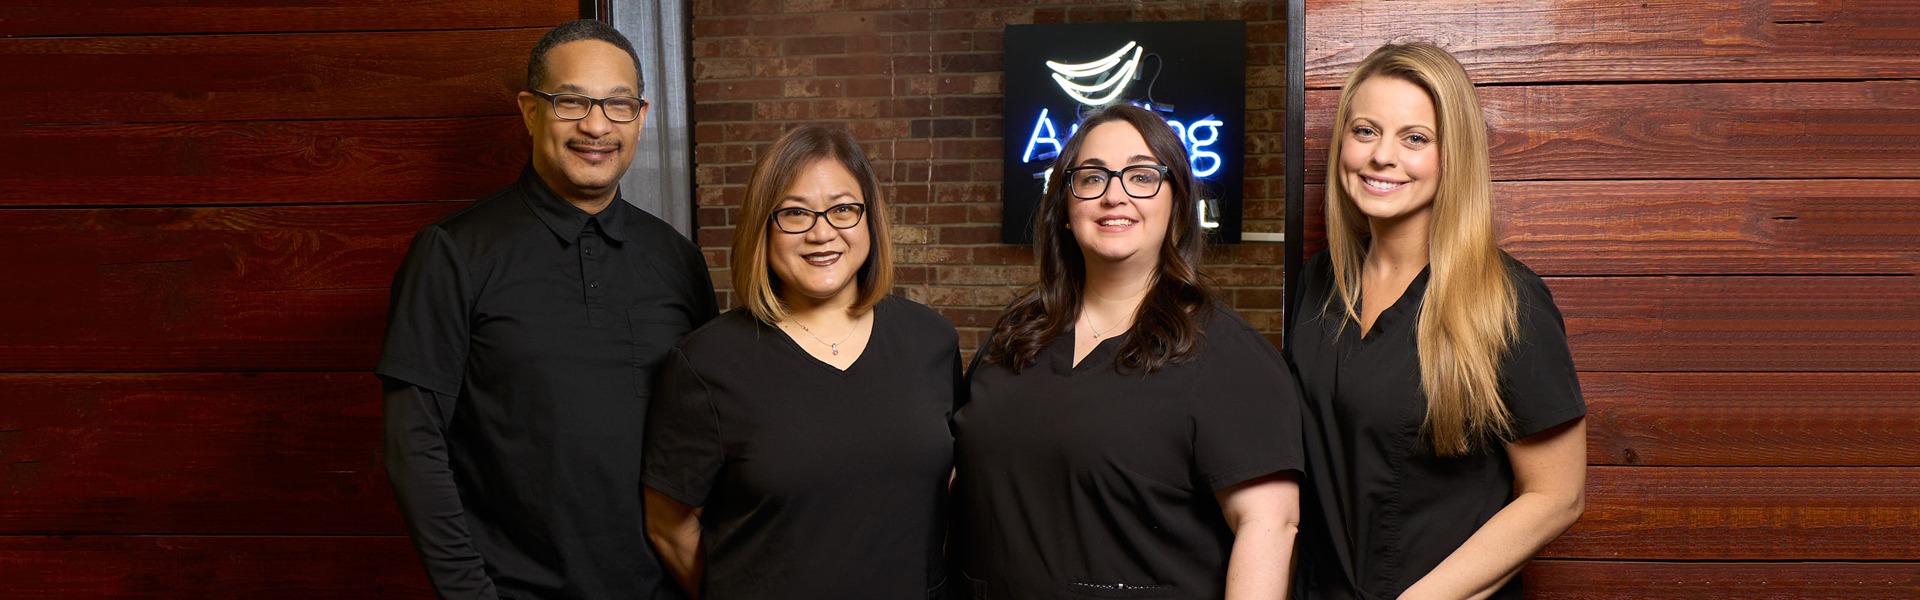 Meet the Staff at Anding Family Dental